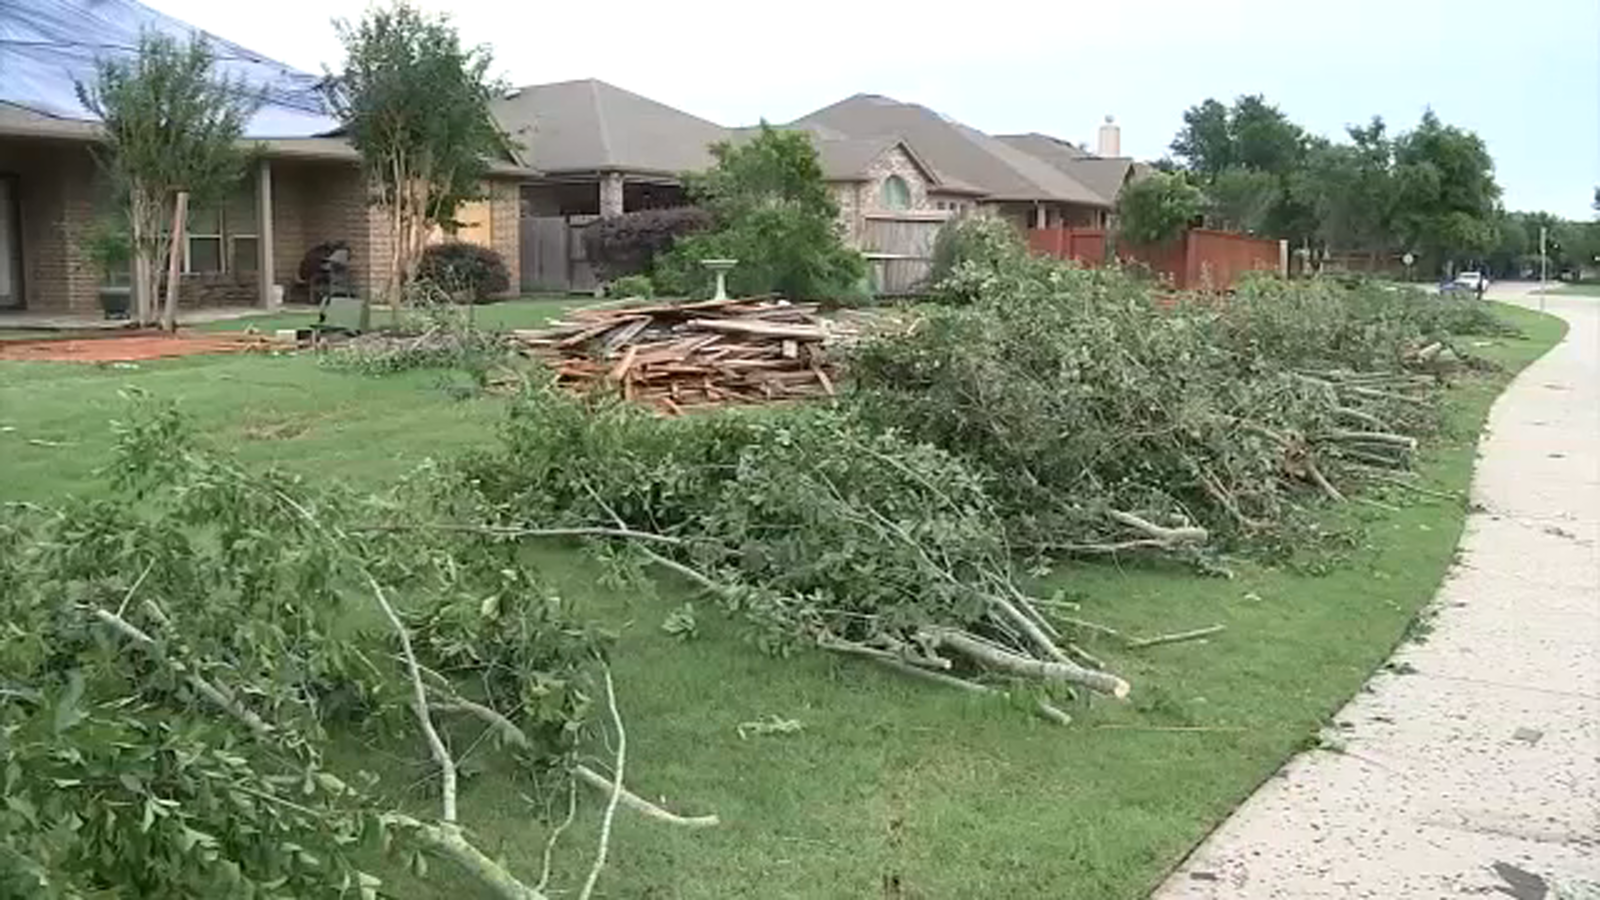 Cypress residents on confirmed tornado: 'Everything was flying'